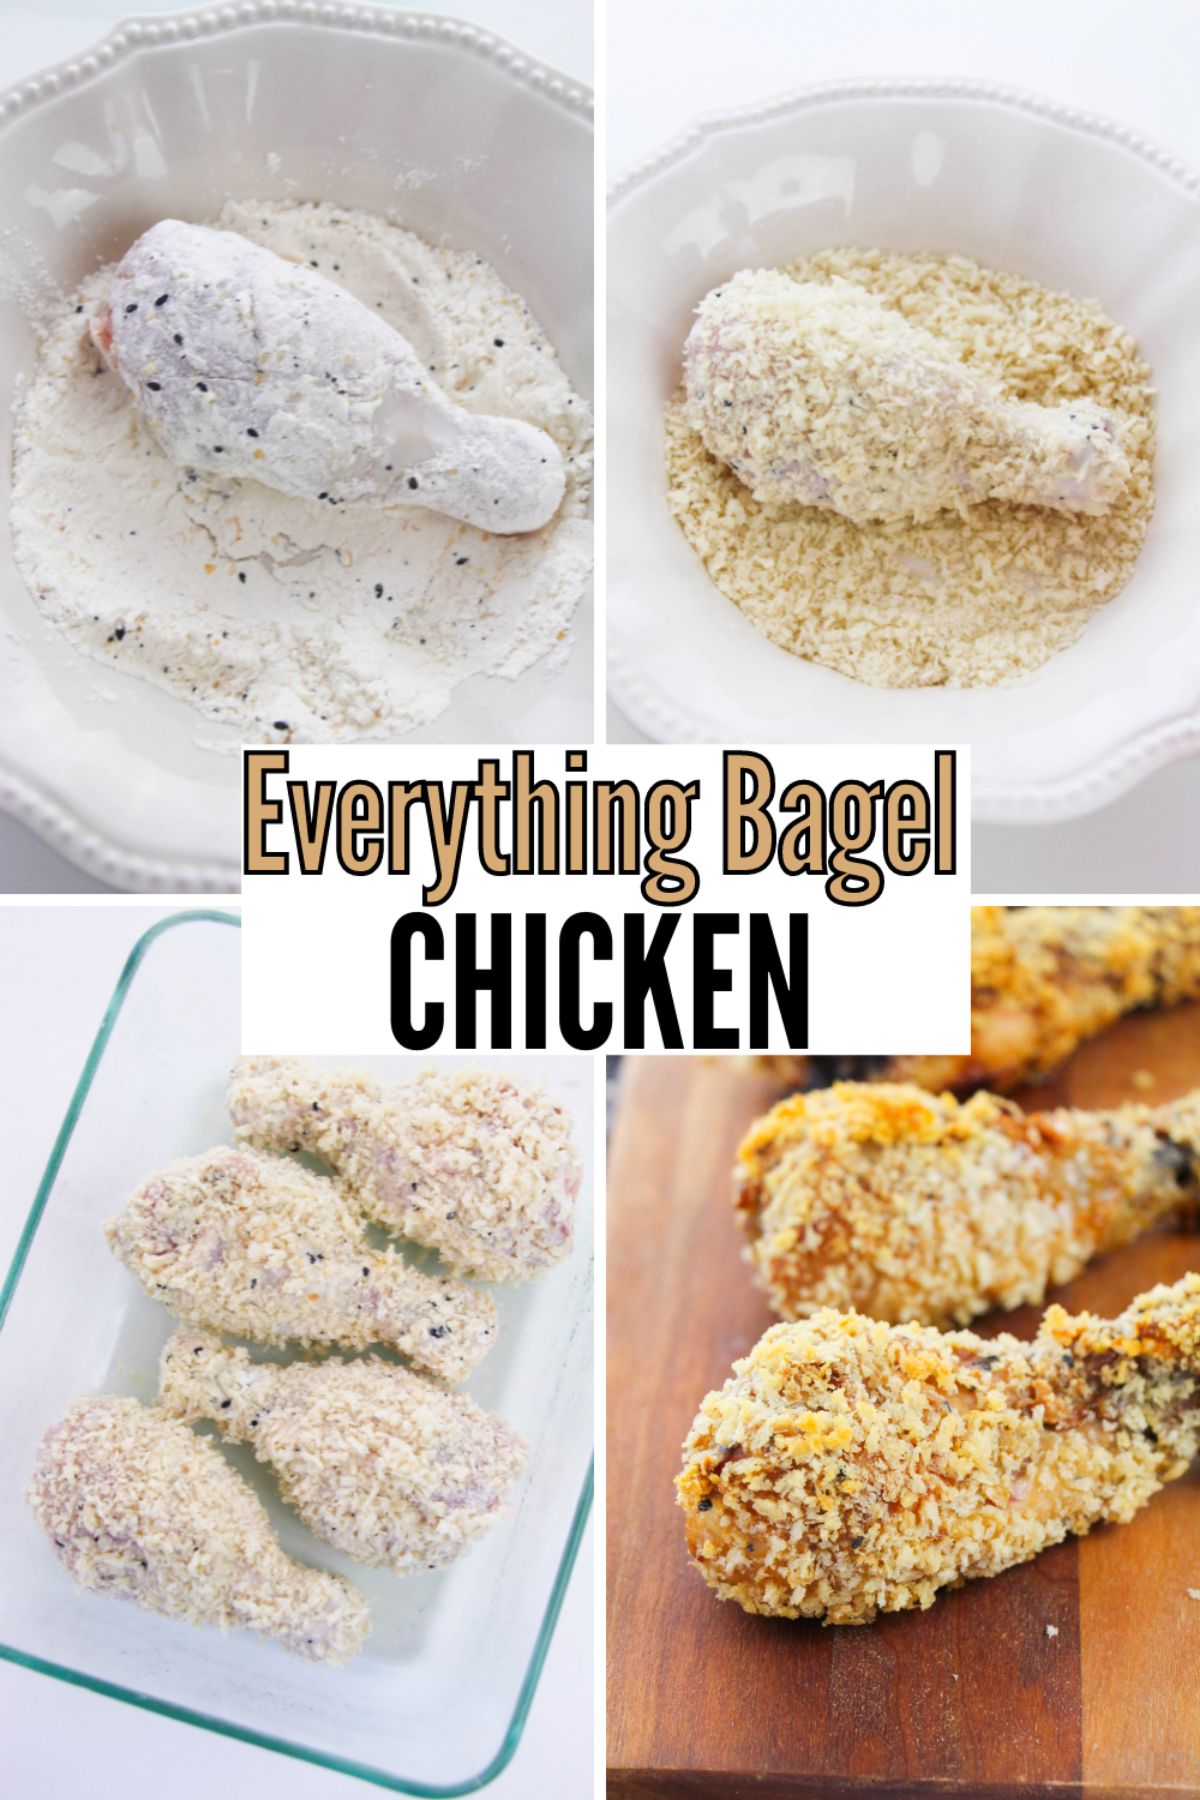 Everything Bagel Chicken is a delicious twist on the usual chicken recipe. It's a simple and quick dish that costs little to make. #everythingbagelchicken #everythingbagel #chicken #chickendinner #recipe via @wondermomwannab